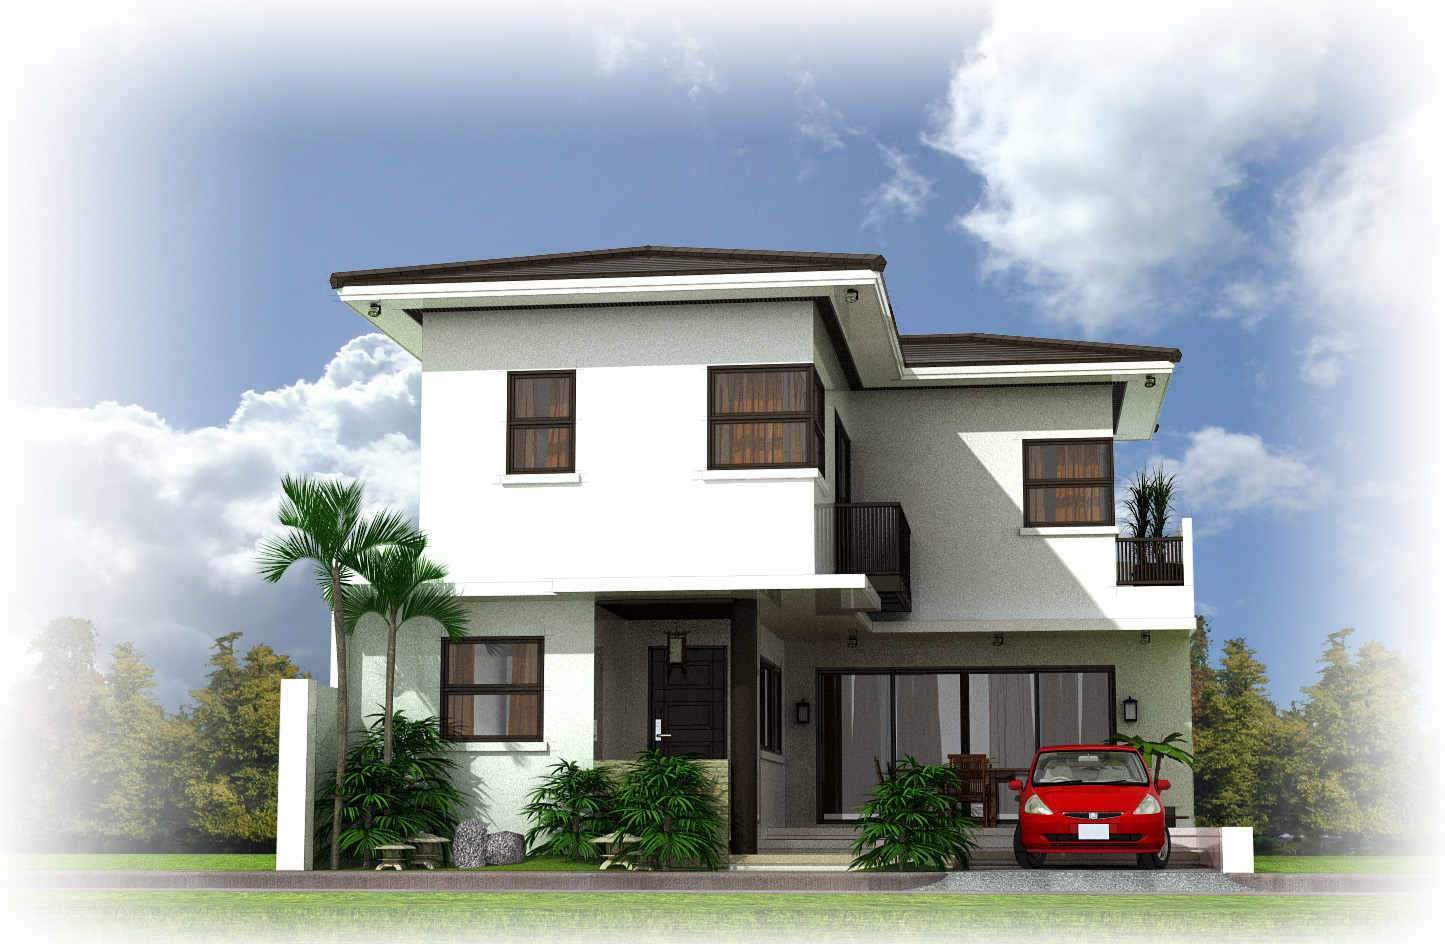 A two storey residence proposal